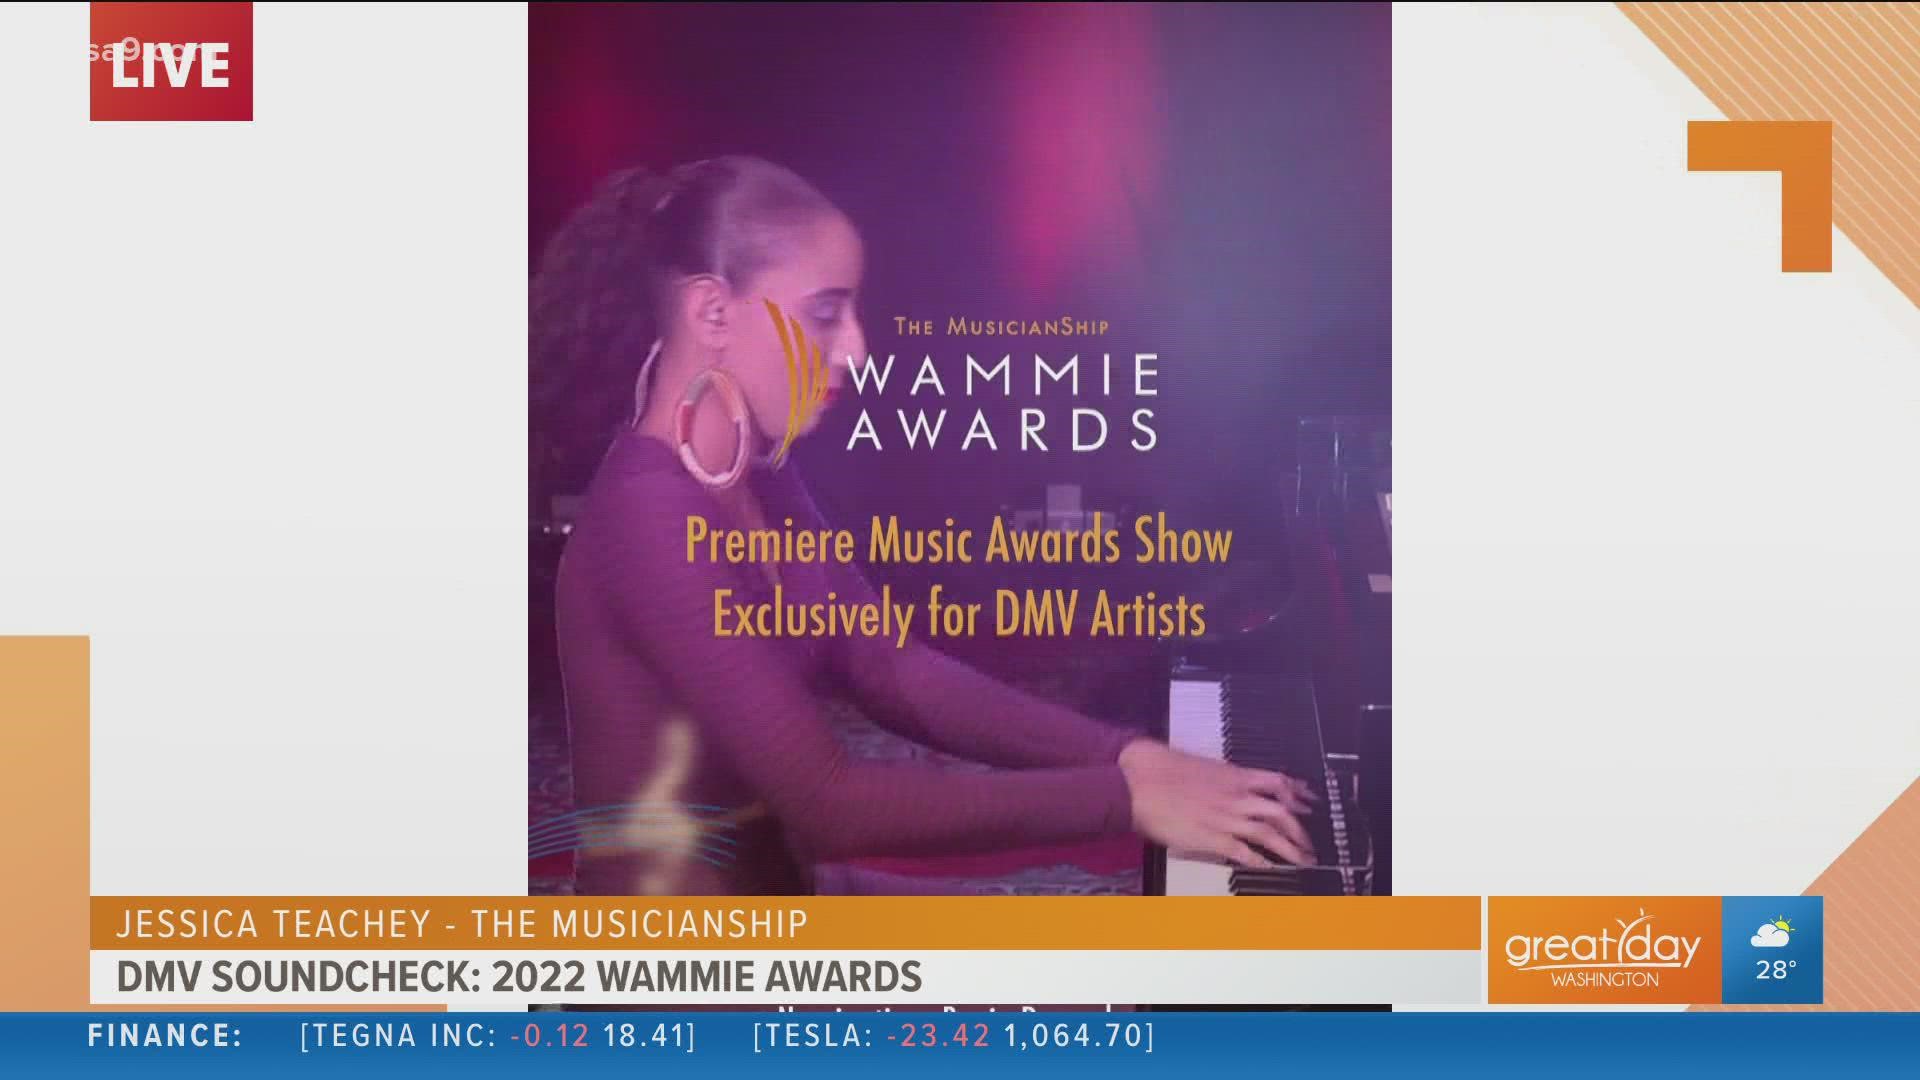 Jessica Teachey with The Musicianship explains how you can send your submission to be nominated for the DMV Wammies.